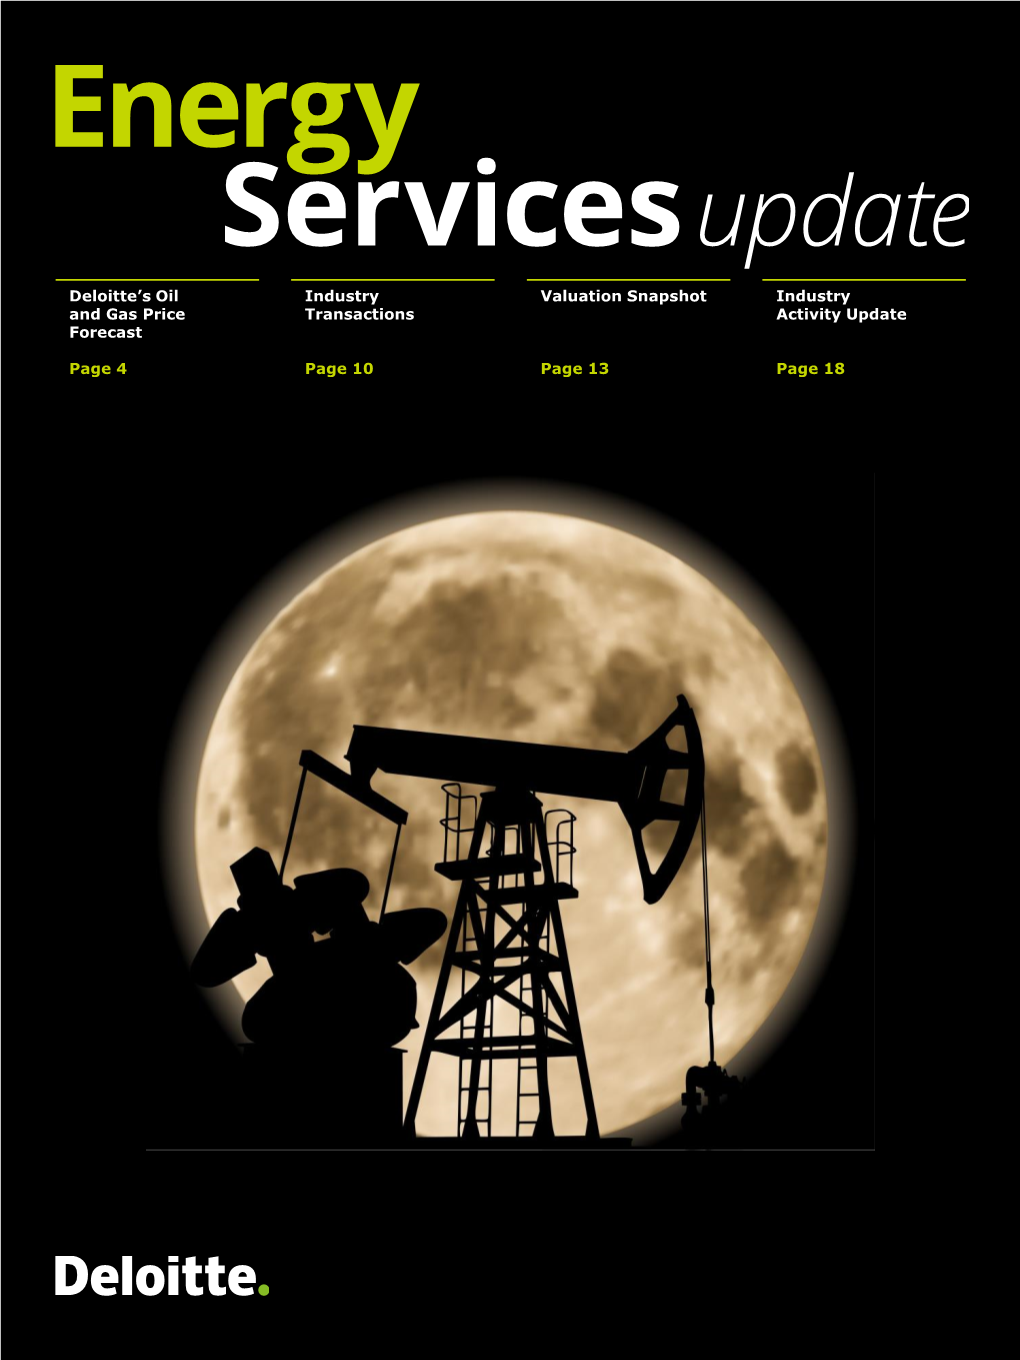 Deloitte's Oil and Gas Price Forecast